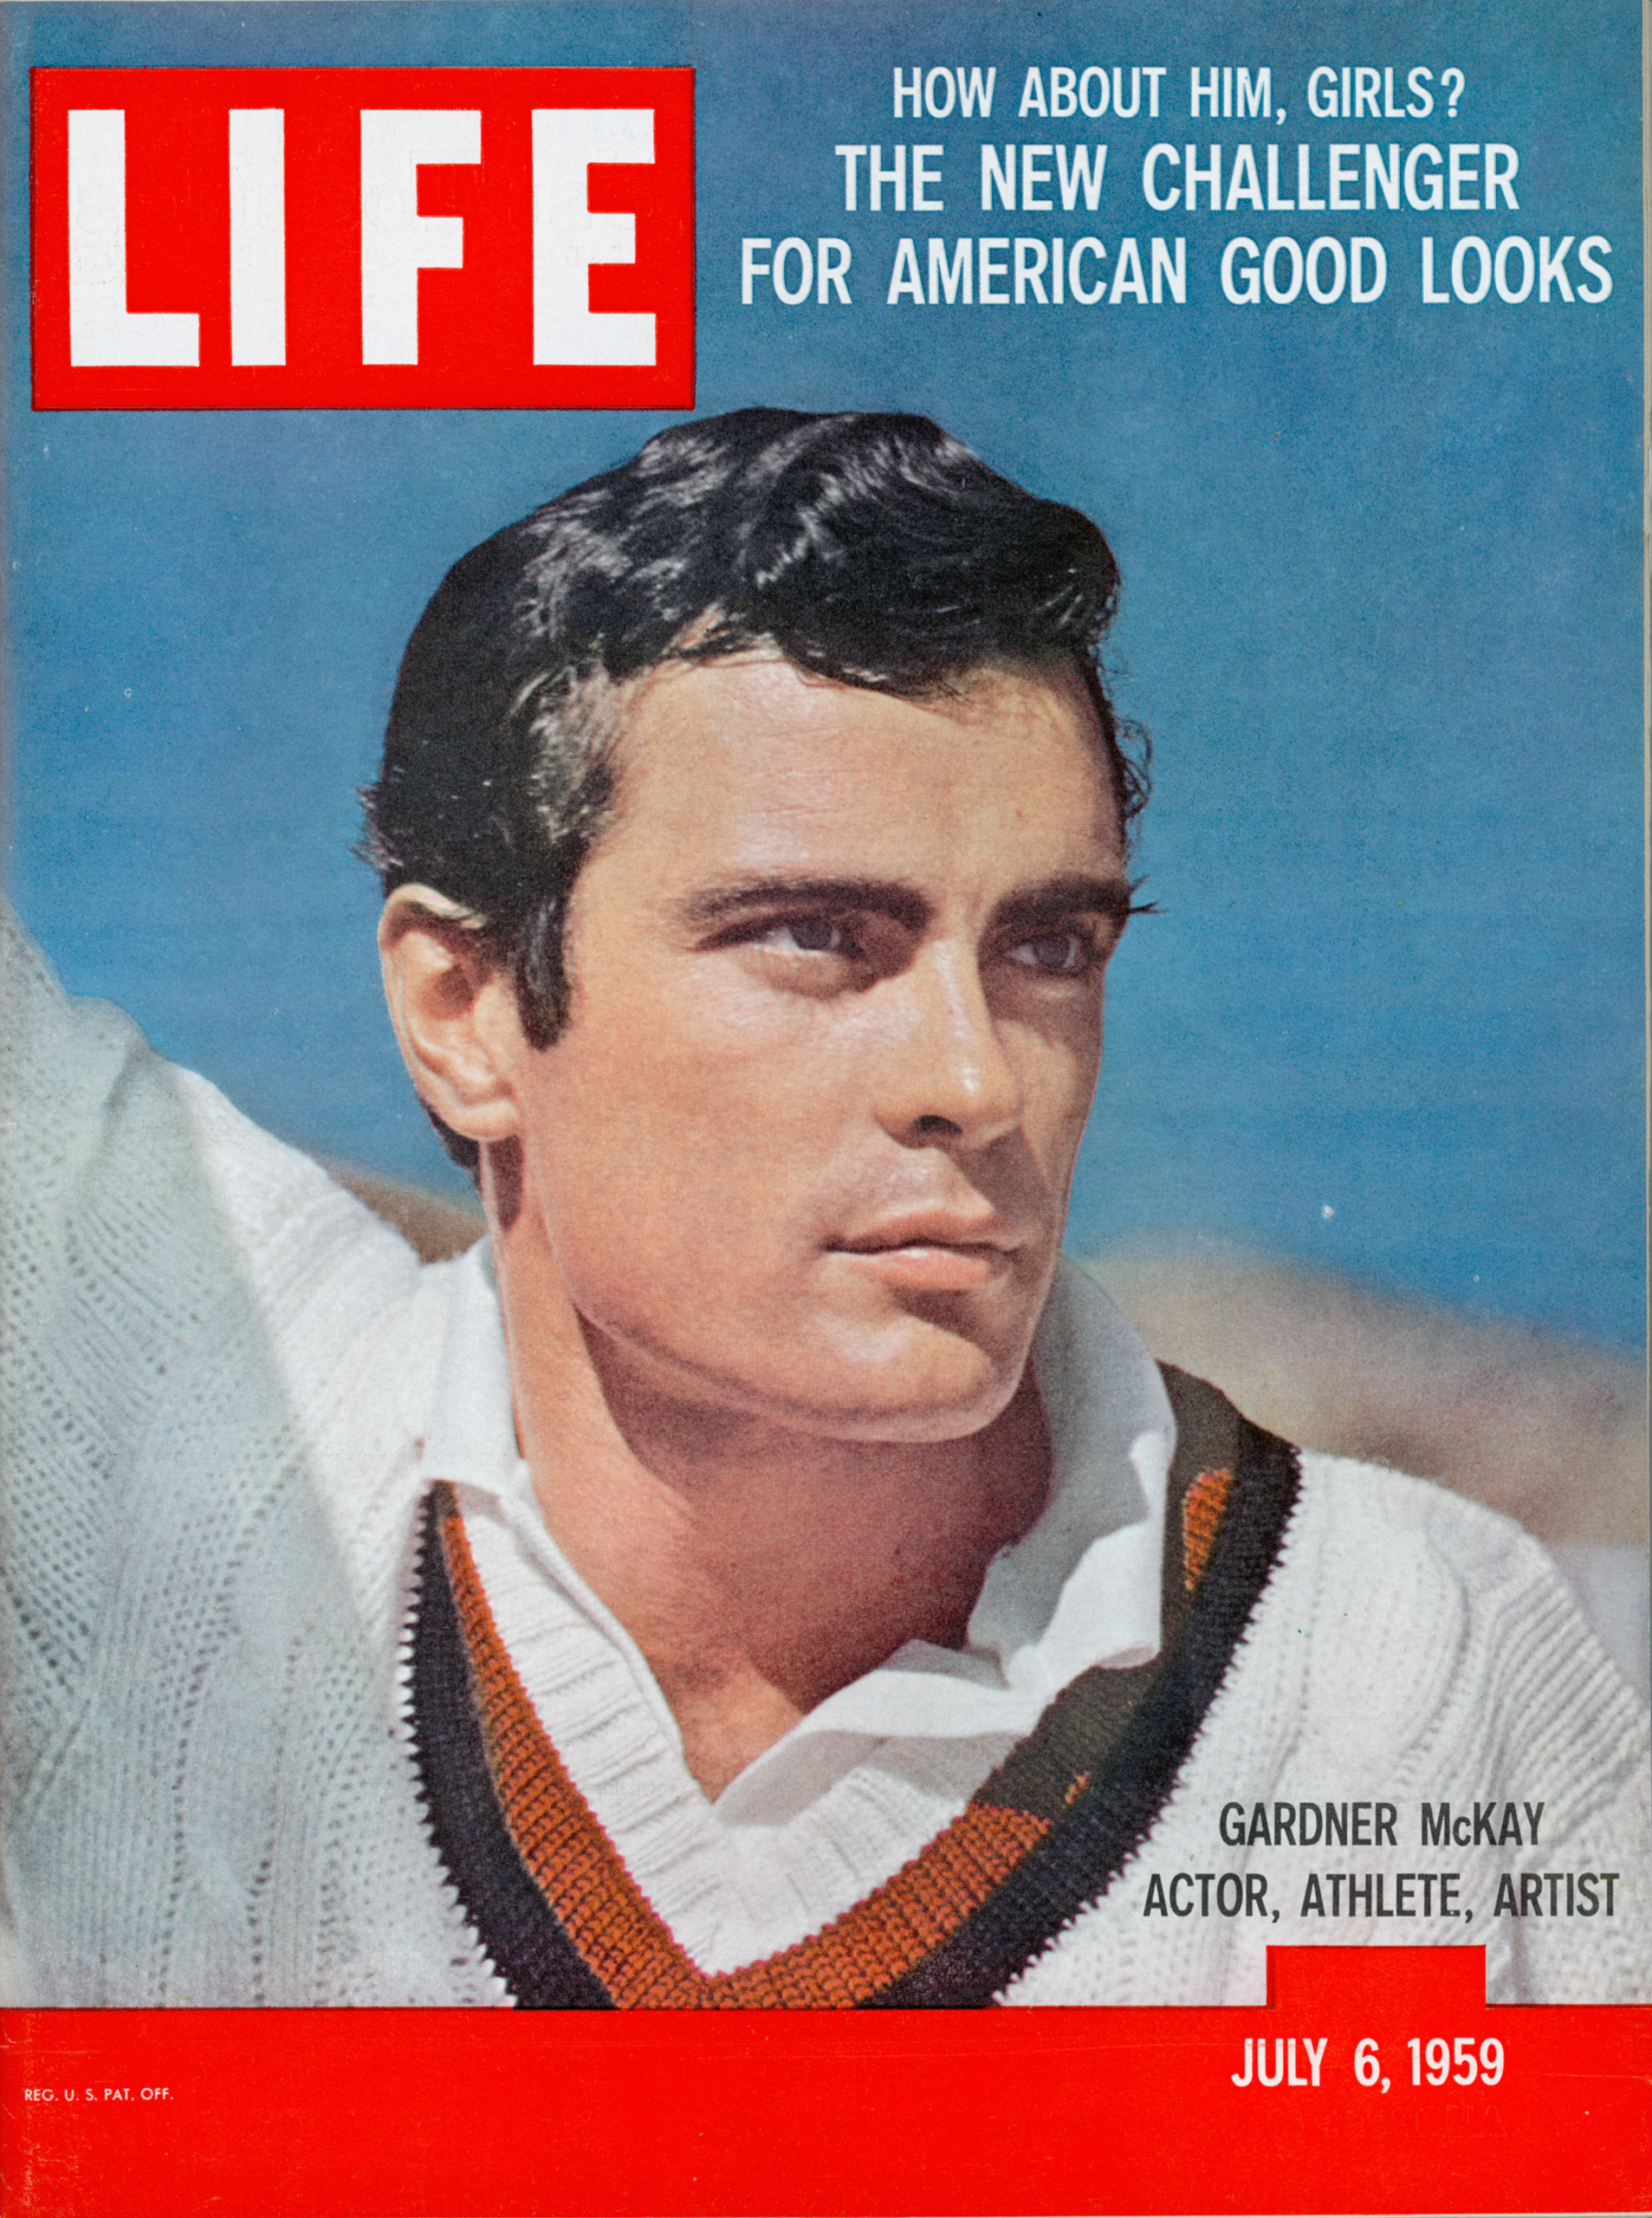 July 6, 1959 cover of LIFE magazine.